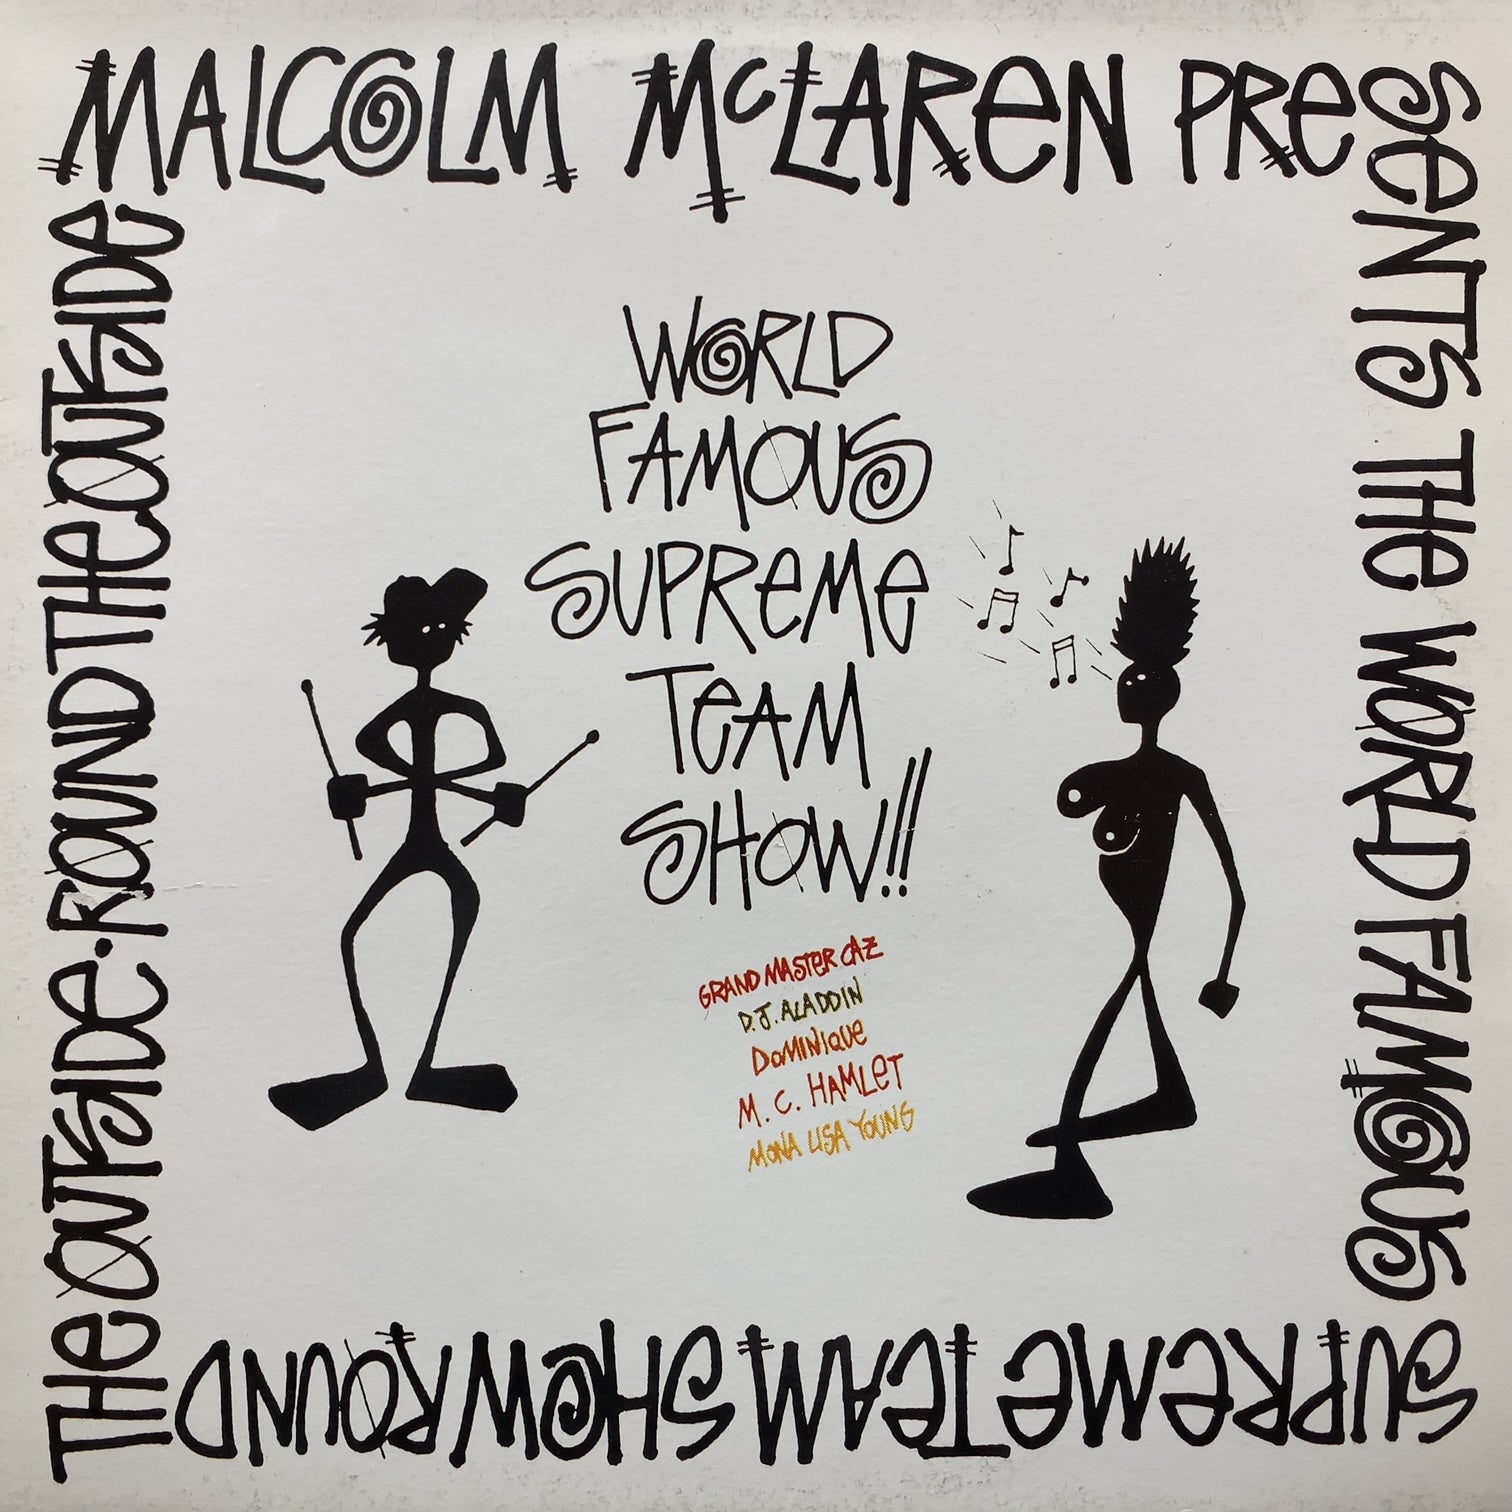 MALCOLM McLAREN & WORLD'S FAMOUS SUPREME TEAM / ROUND THE OUTSIDE